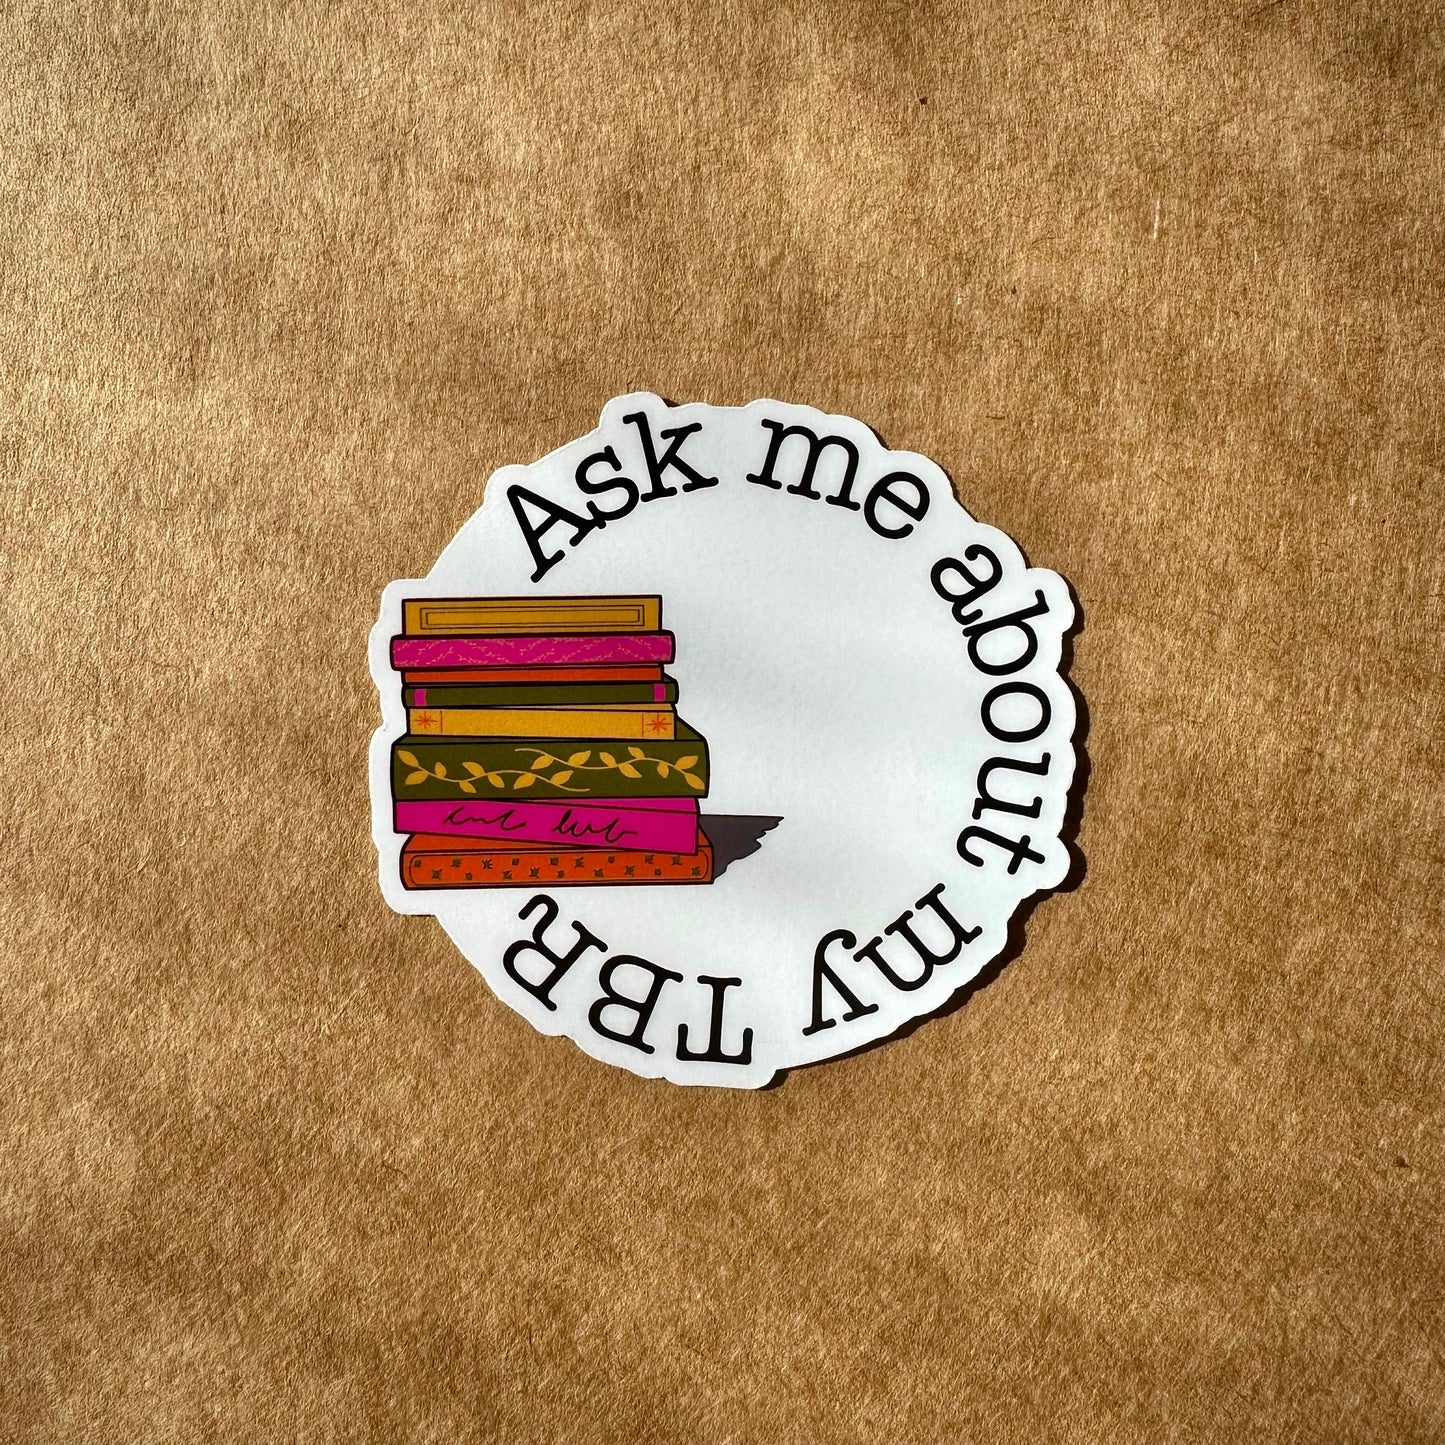 Ask me about my TBR - Book Stack Sticker